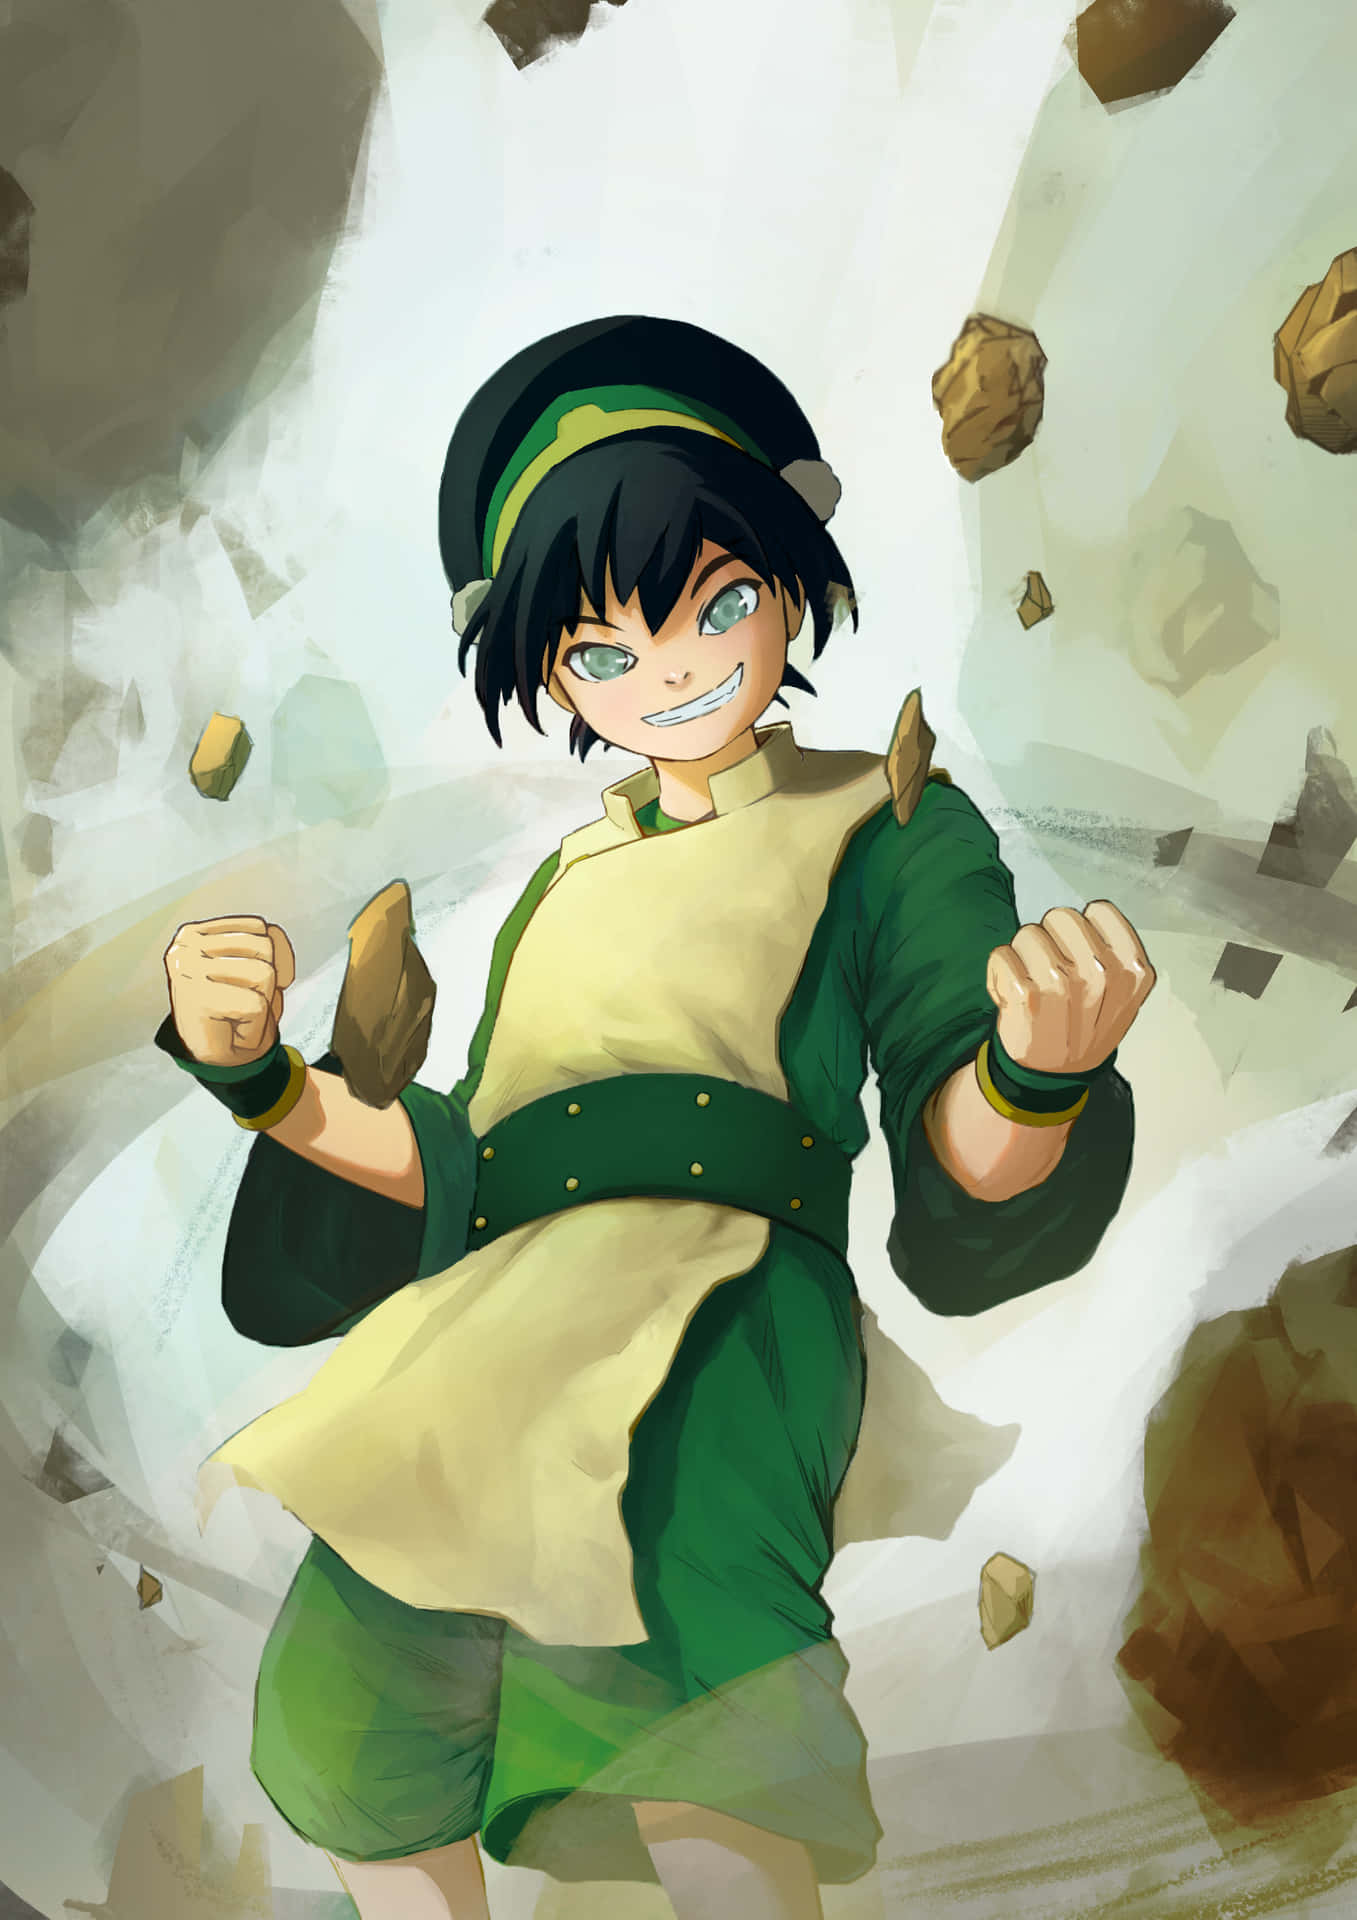 "toph Beifong, The Blind Bandit Of Avatar: The Last Airbender" Wallpaper